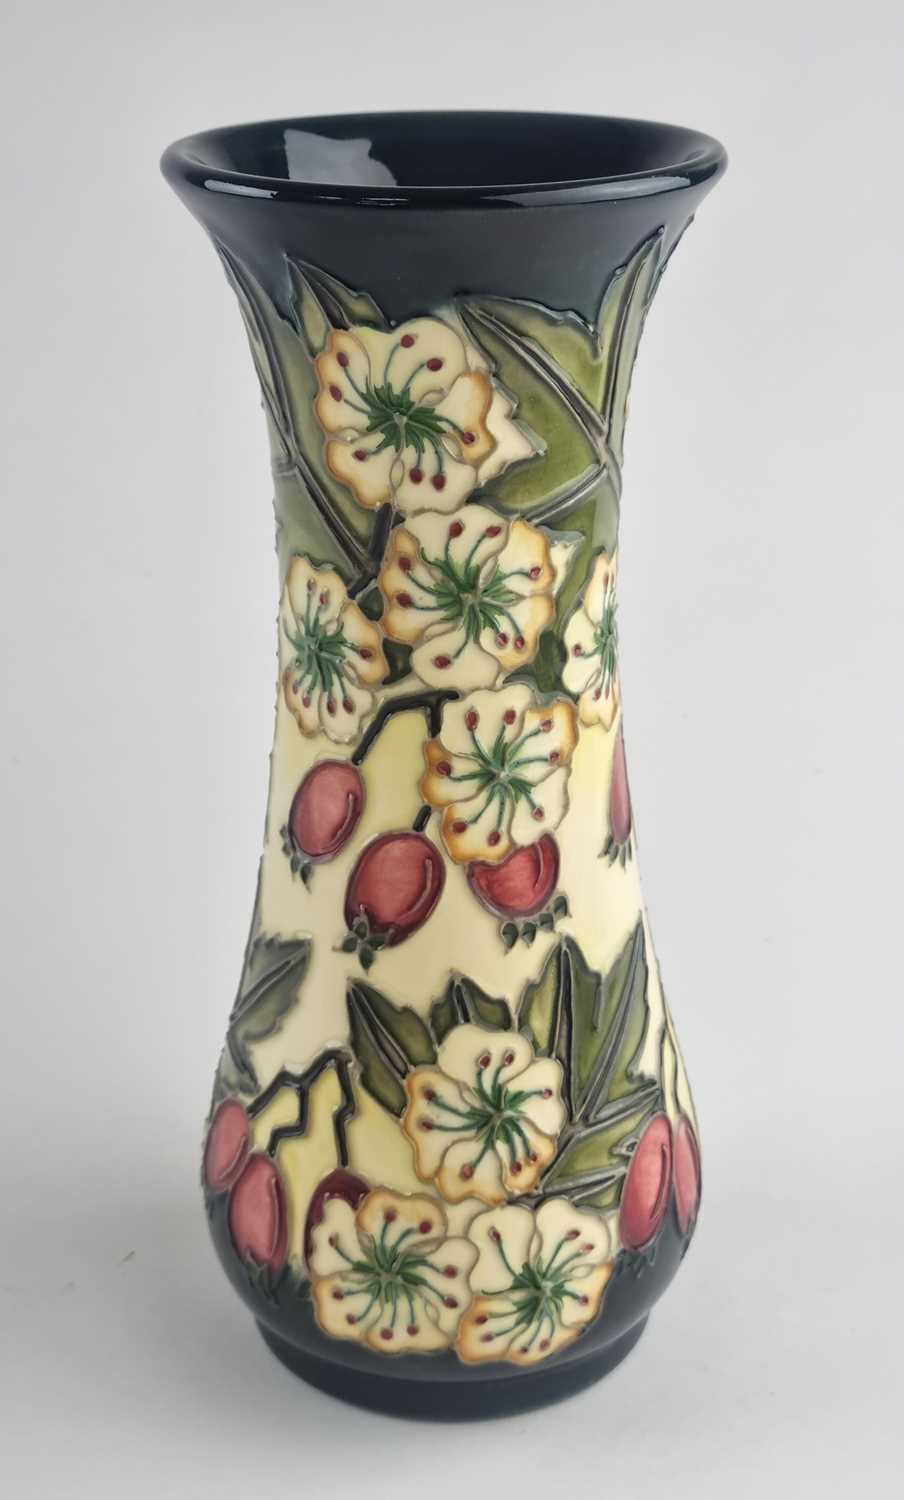 Lot Moorcroft limited edition 'Hawthorn' vase, made for Liberty